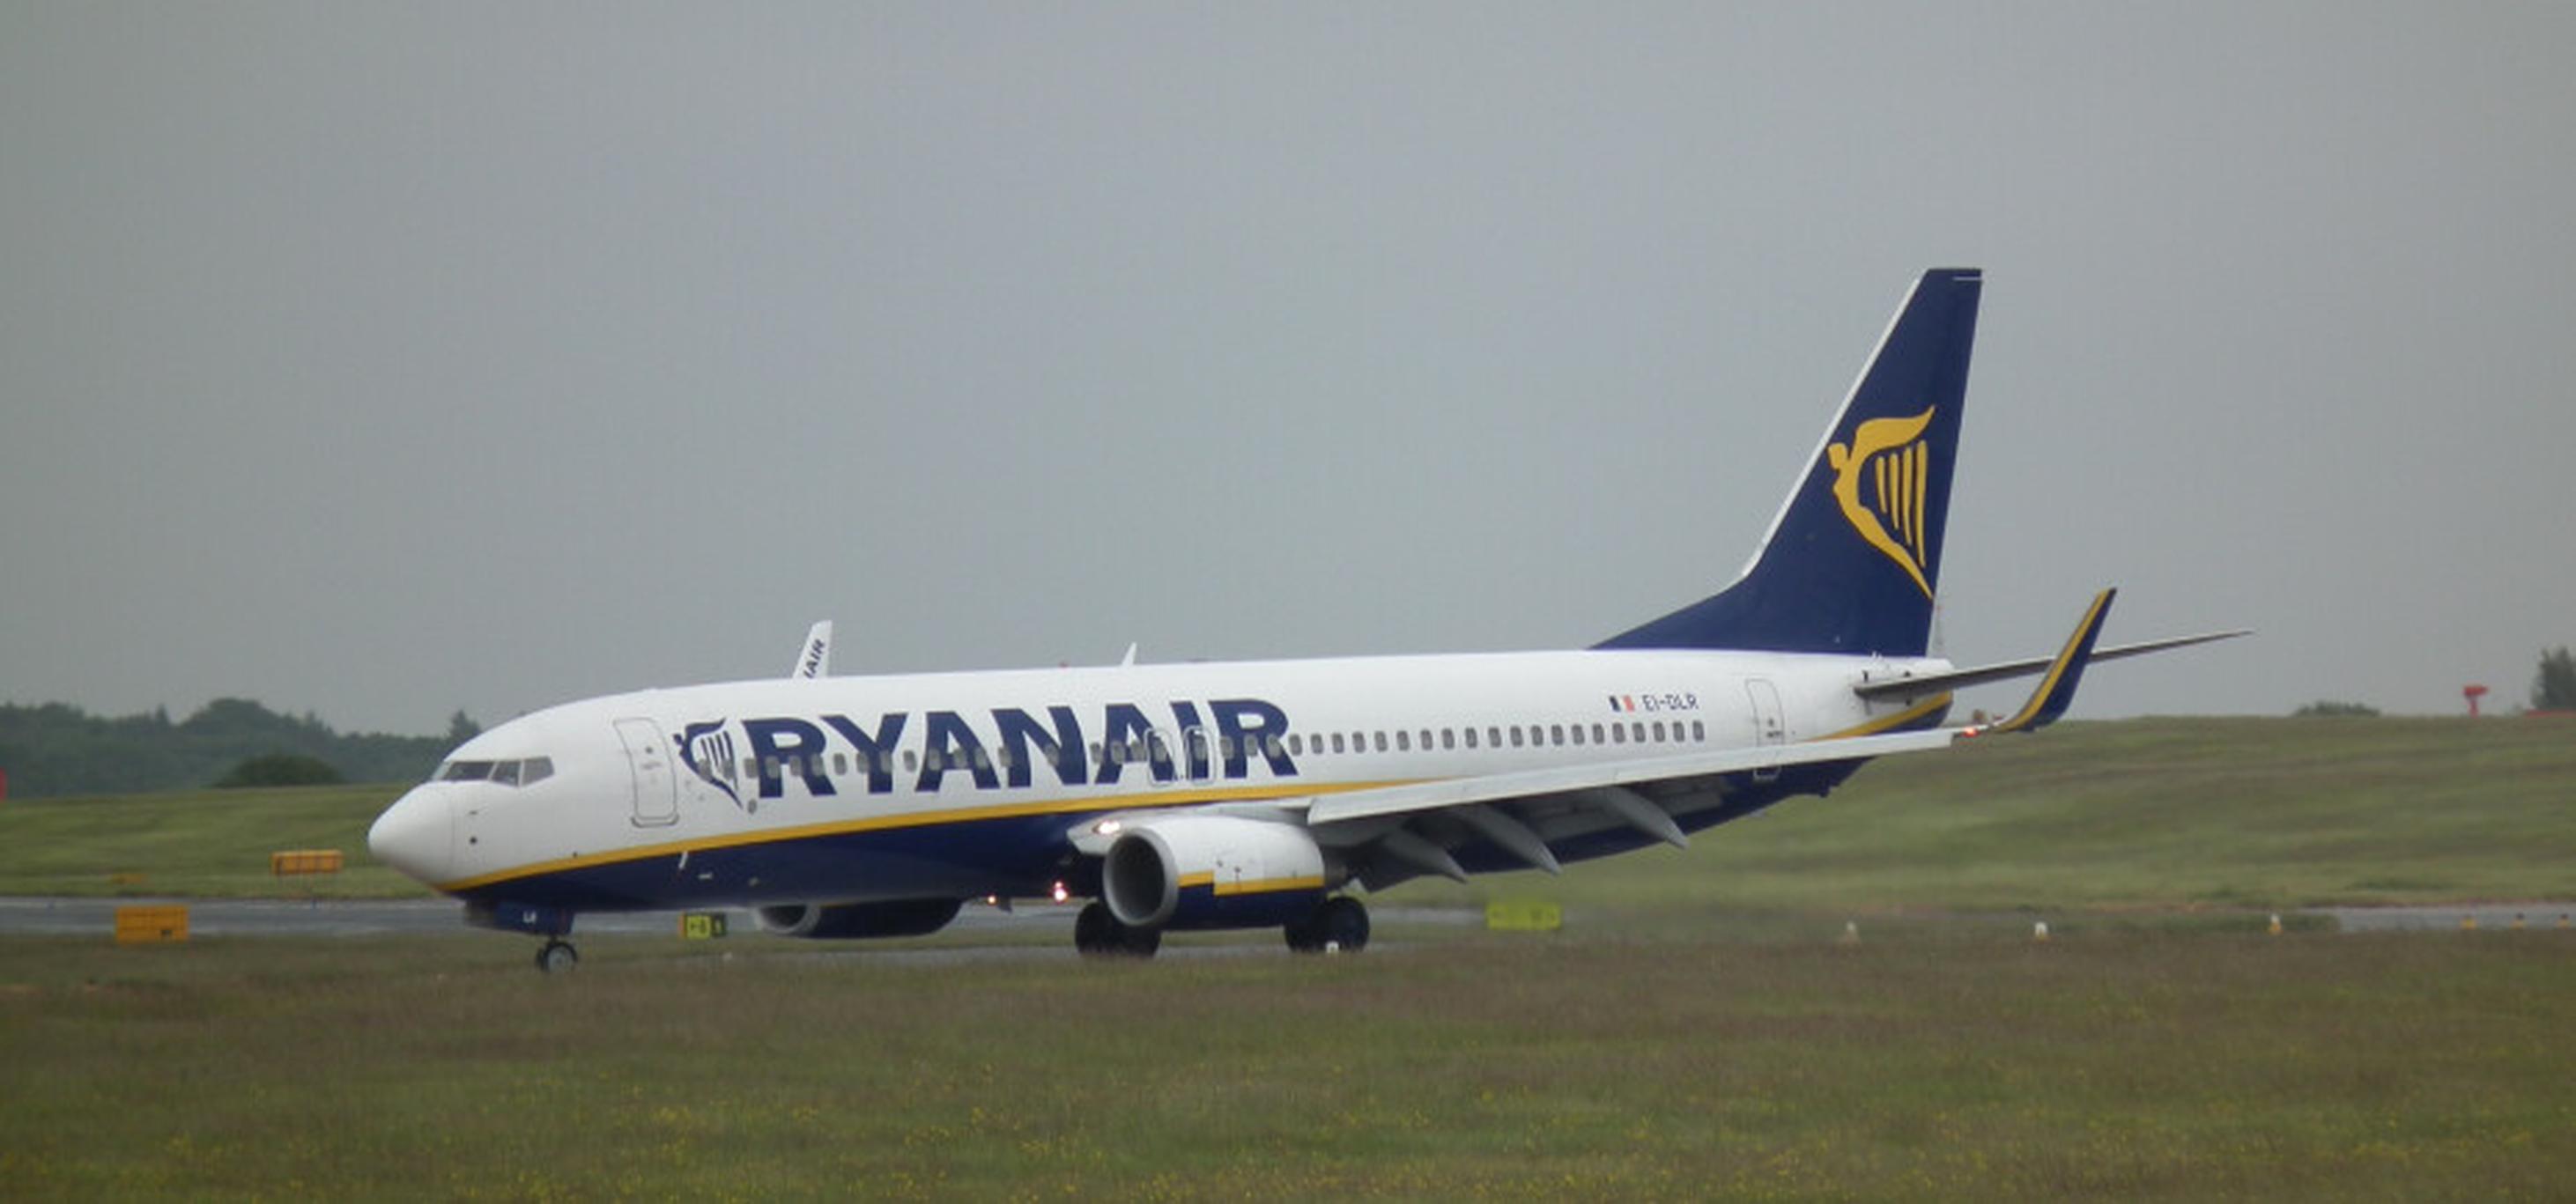 Ryanair expects a net loss of more than €100m (£87m) for the first three months of the year